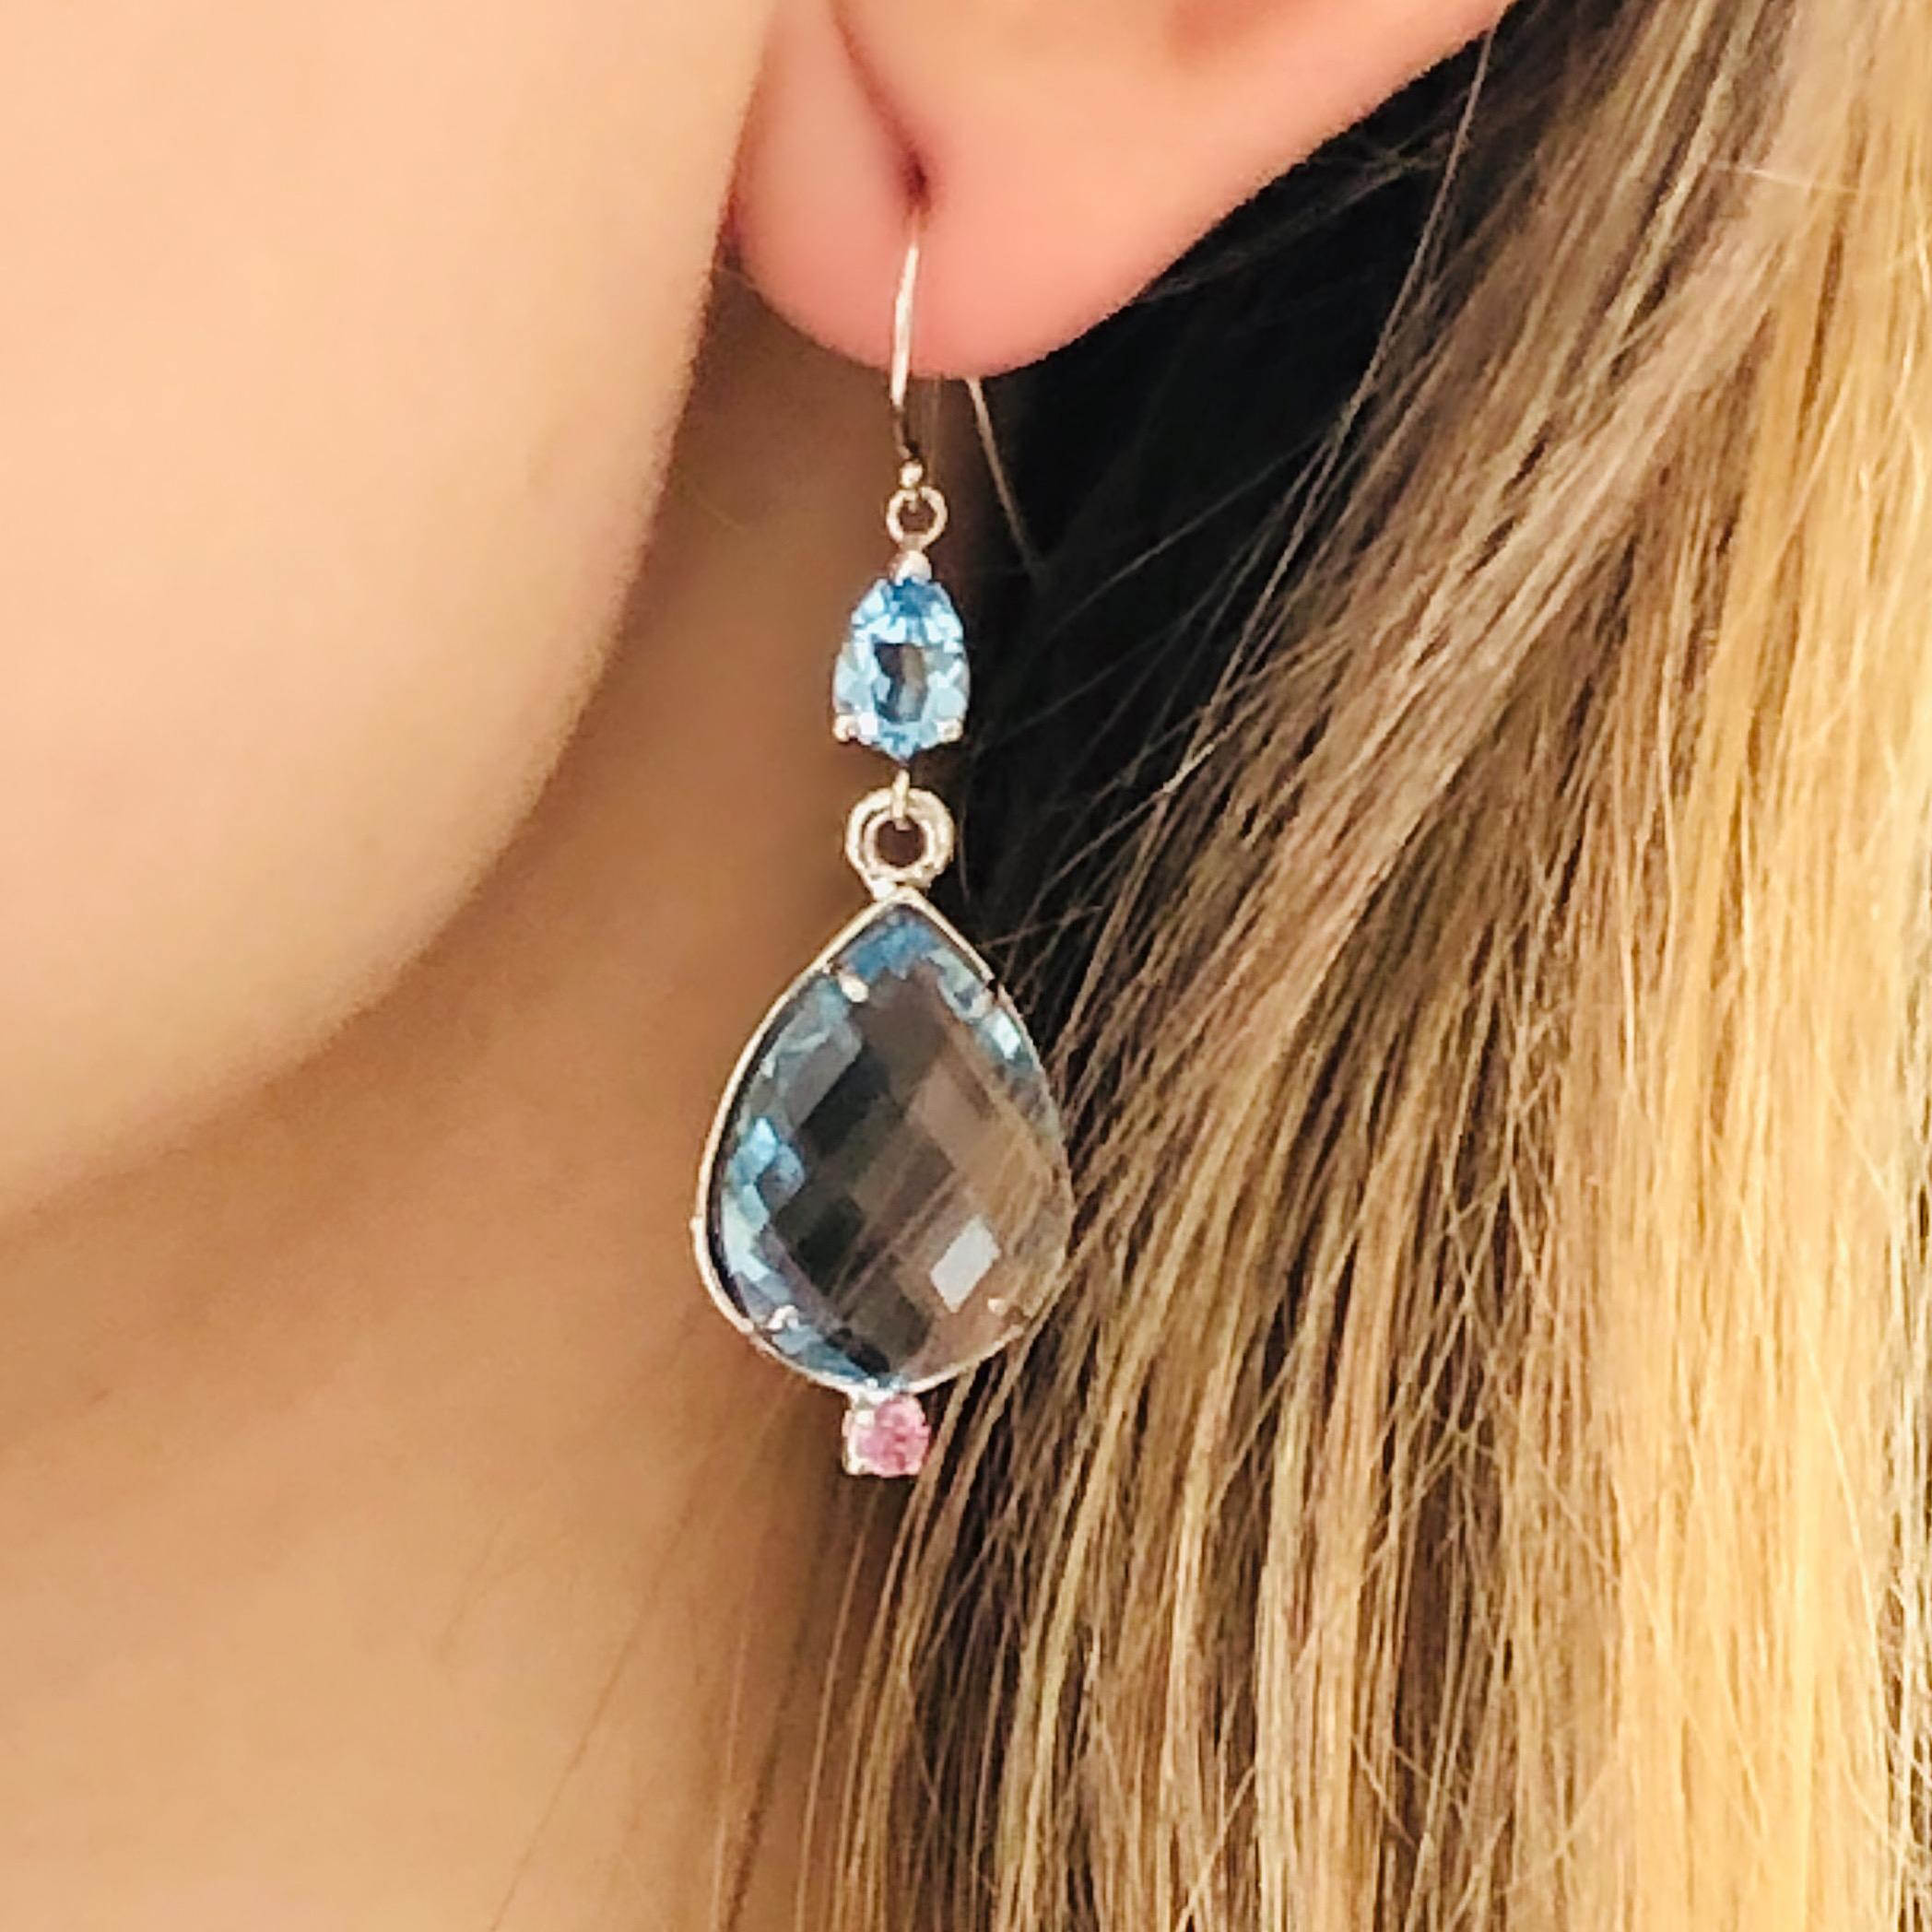 Fourteen karats white gold hoop earrings
Two double-sided Briolette pear-shaped blue Topaz weighing  7.00 carats
Two pear shape blue topaz weighing 2.00
Two pink sapphires weighing 0.50
New earrings
Handmade in the USA
